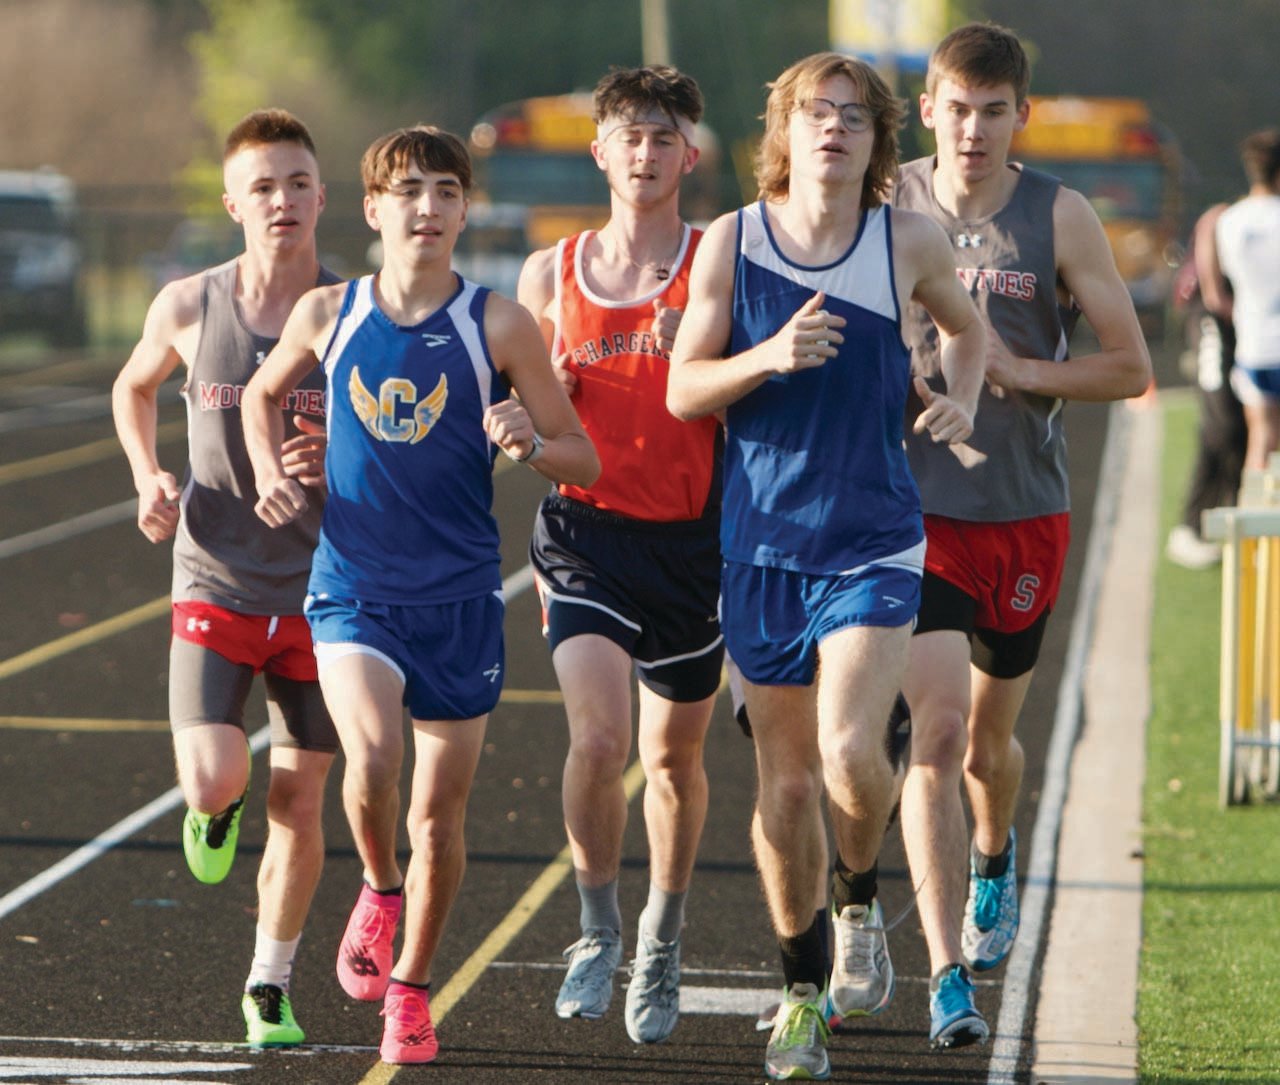 Crawfordsville’s Hunter Hutchison won the mile run for the Athenians on Friday night.